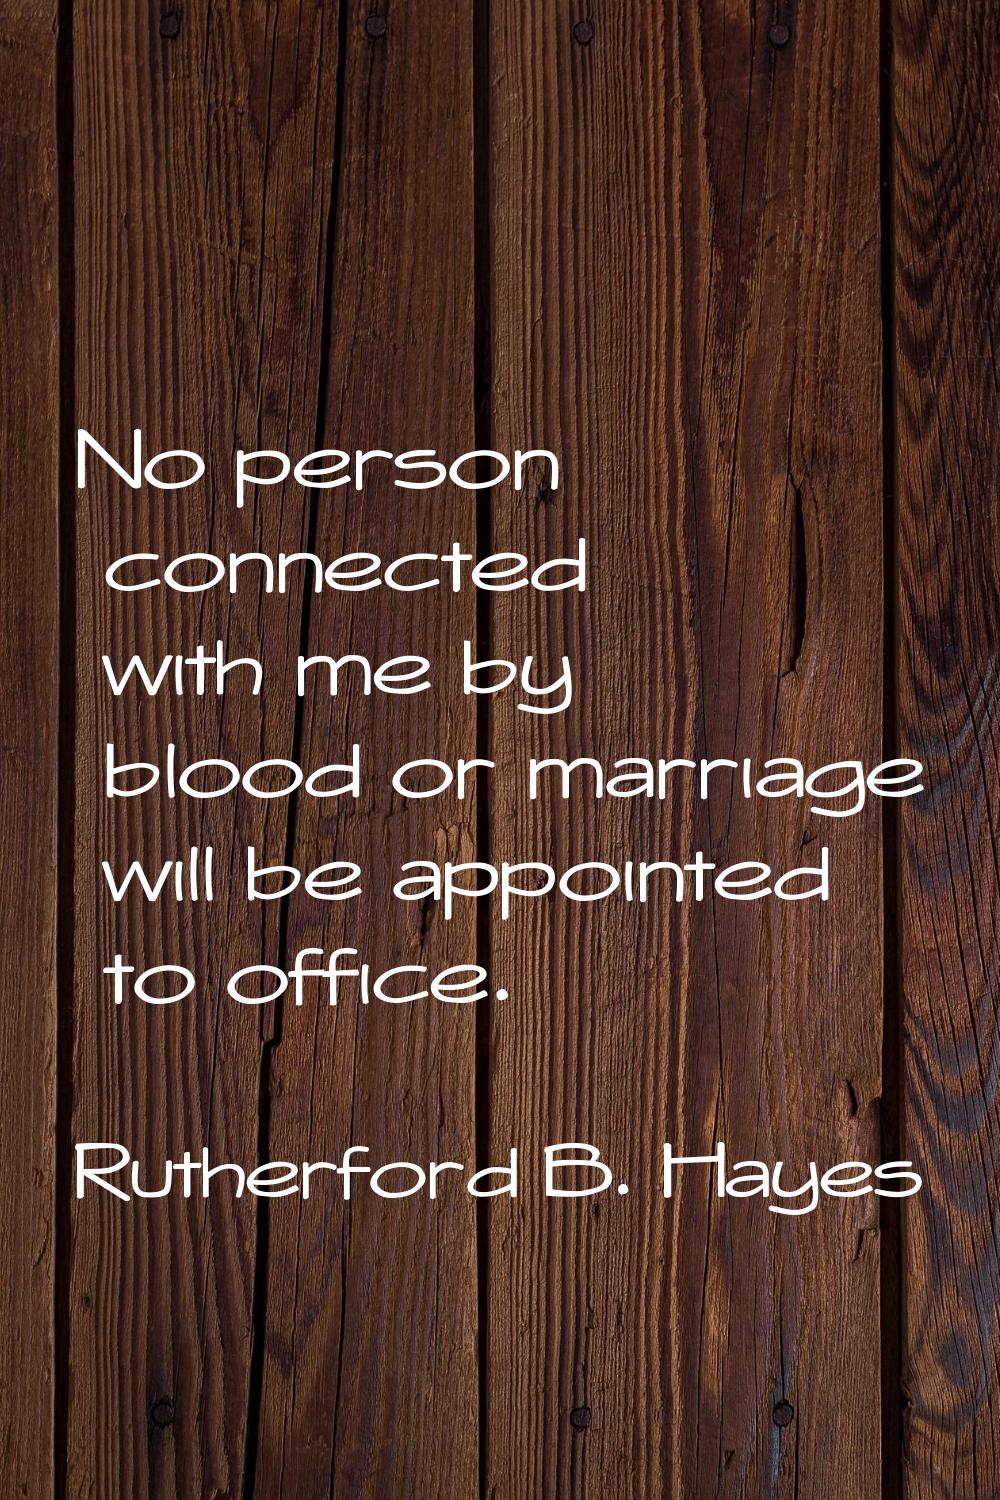 No person connected with me by blood or marriage will be appointed to office.